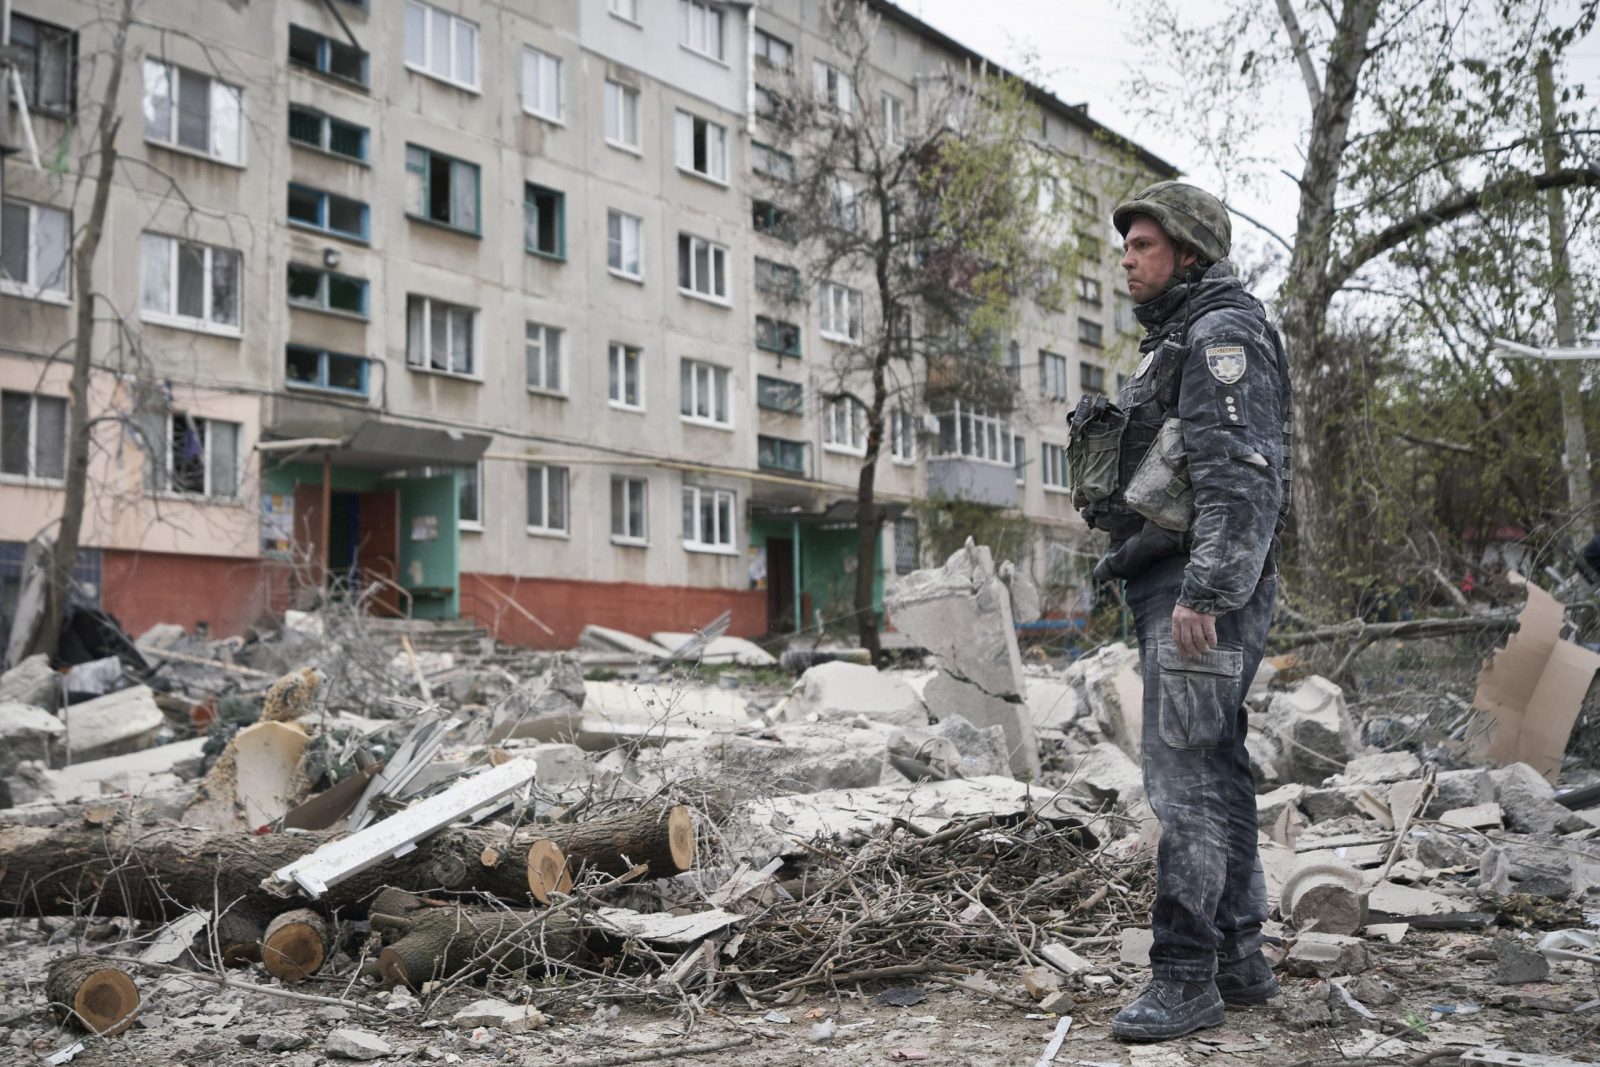 epa10572737 A policeman stands at the scene of a Russian rocket attack on a residential building in the city of Sloviansk in Donetsk, Ukraine, 14 April 2023. At least 5 people died and 15 were injured according to the regional governor.  EPA/YEVGEN HONCHARENKO